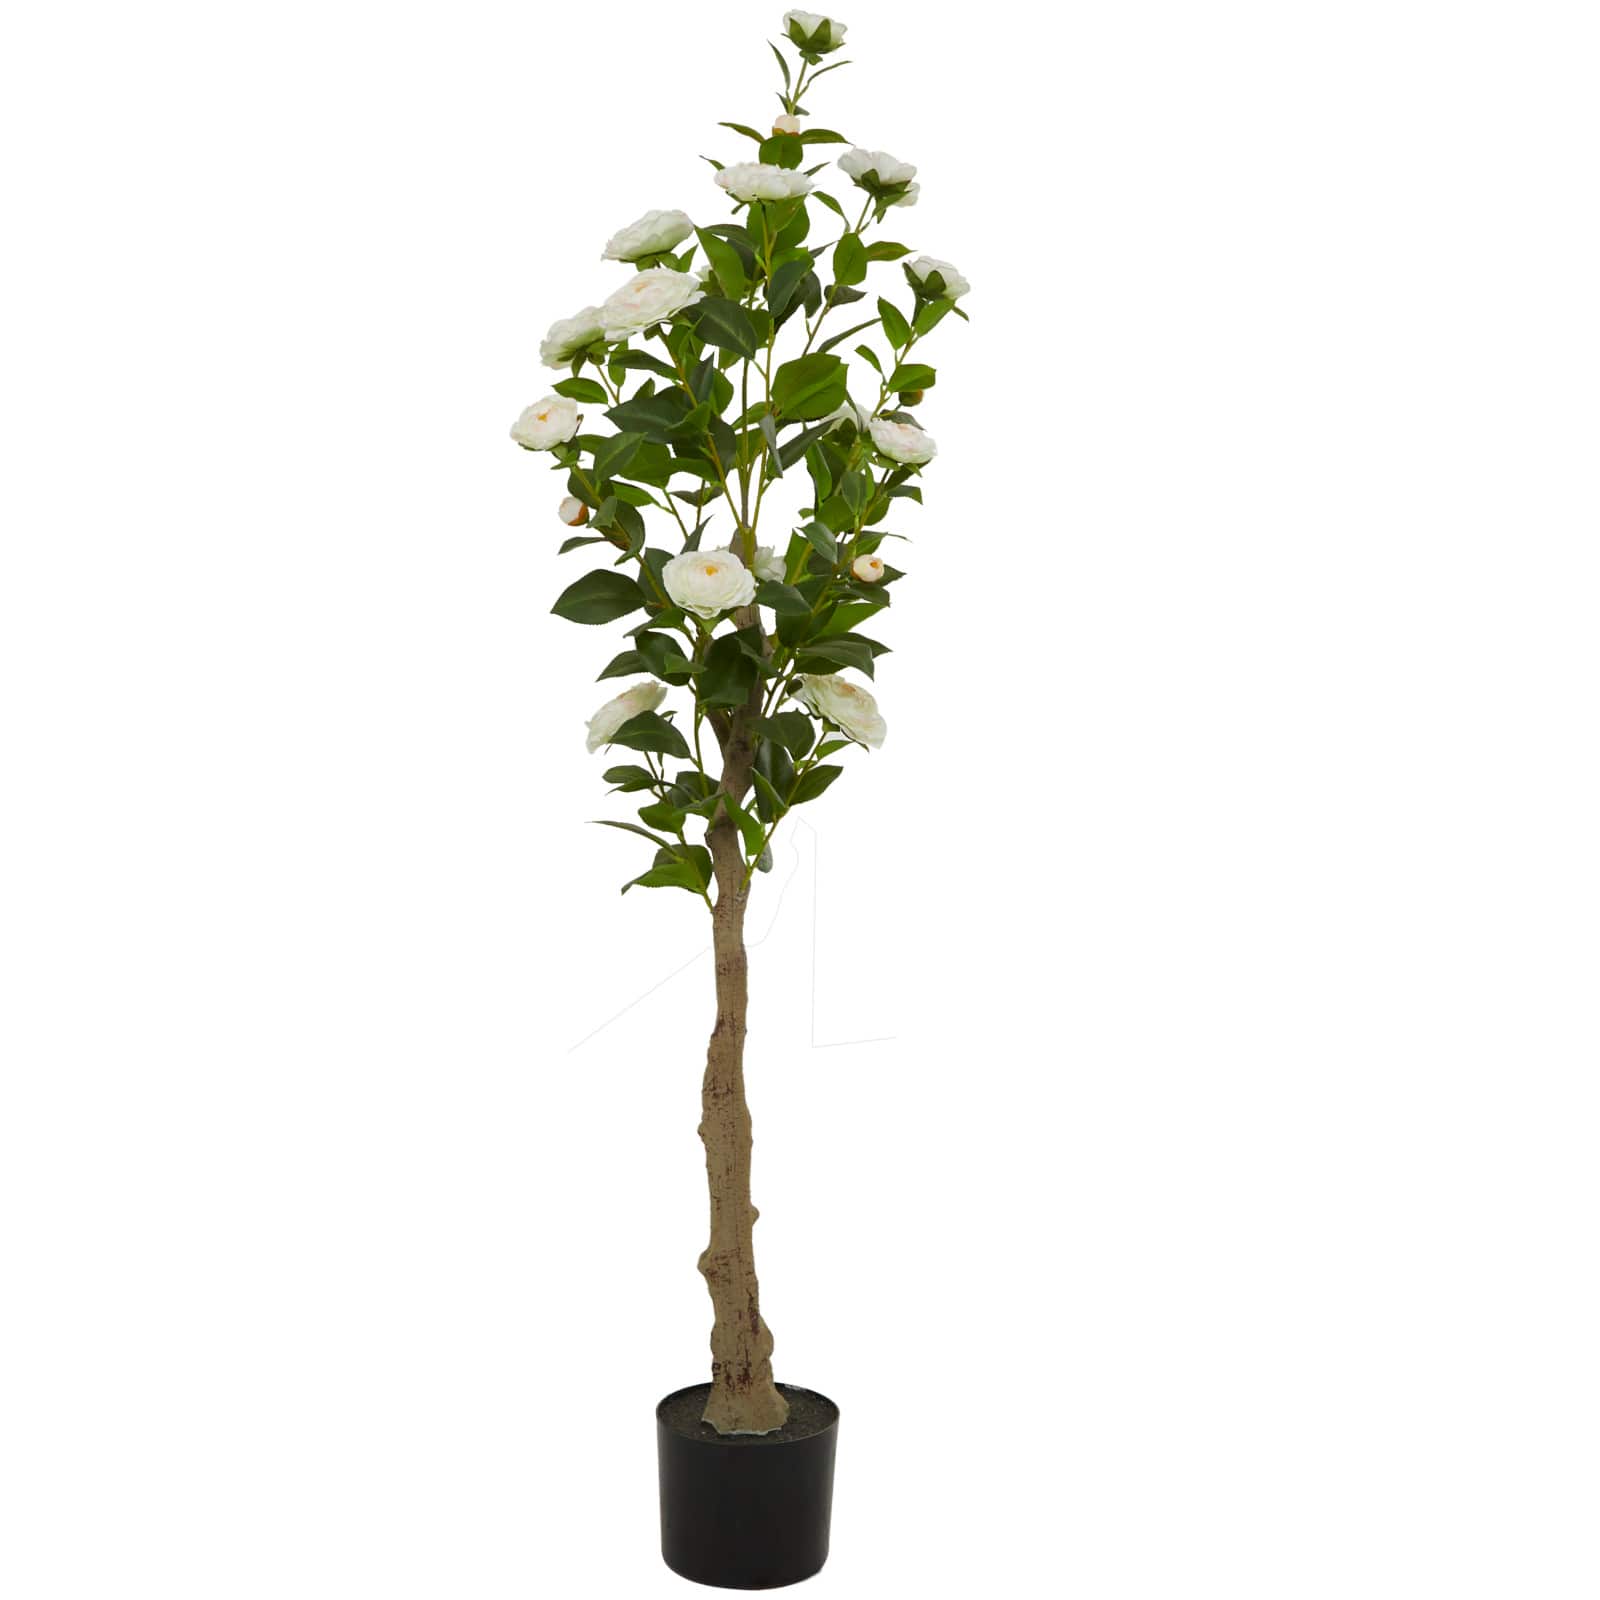 4.5ft. Green Faux Camellia Foliage Artificial Tree with Black Plastic Pot